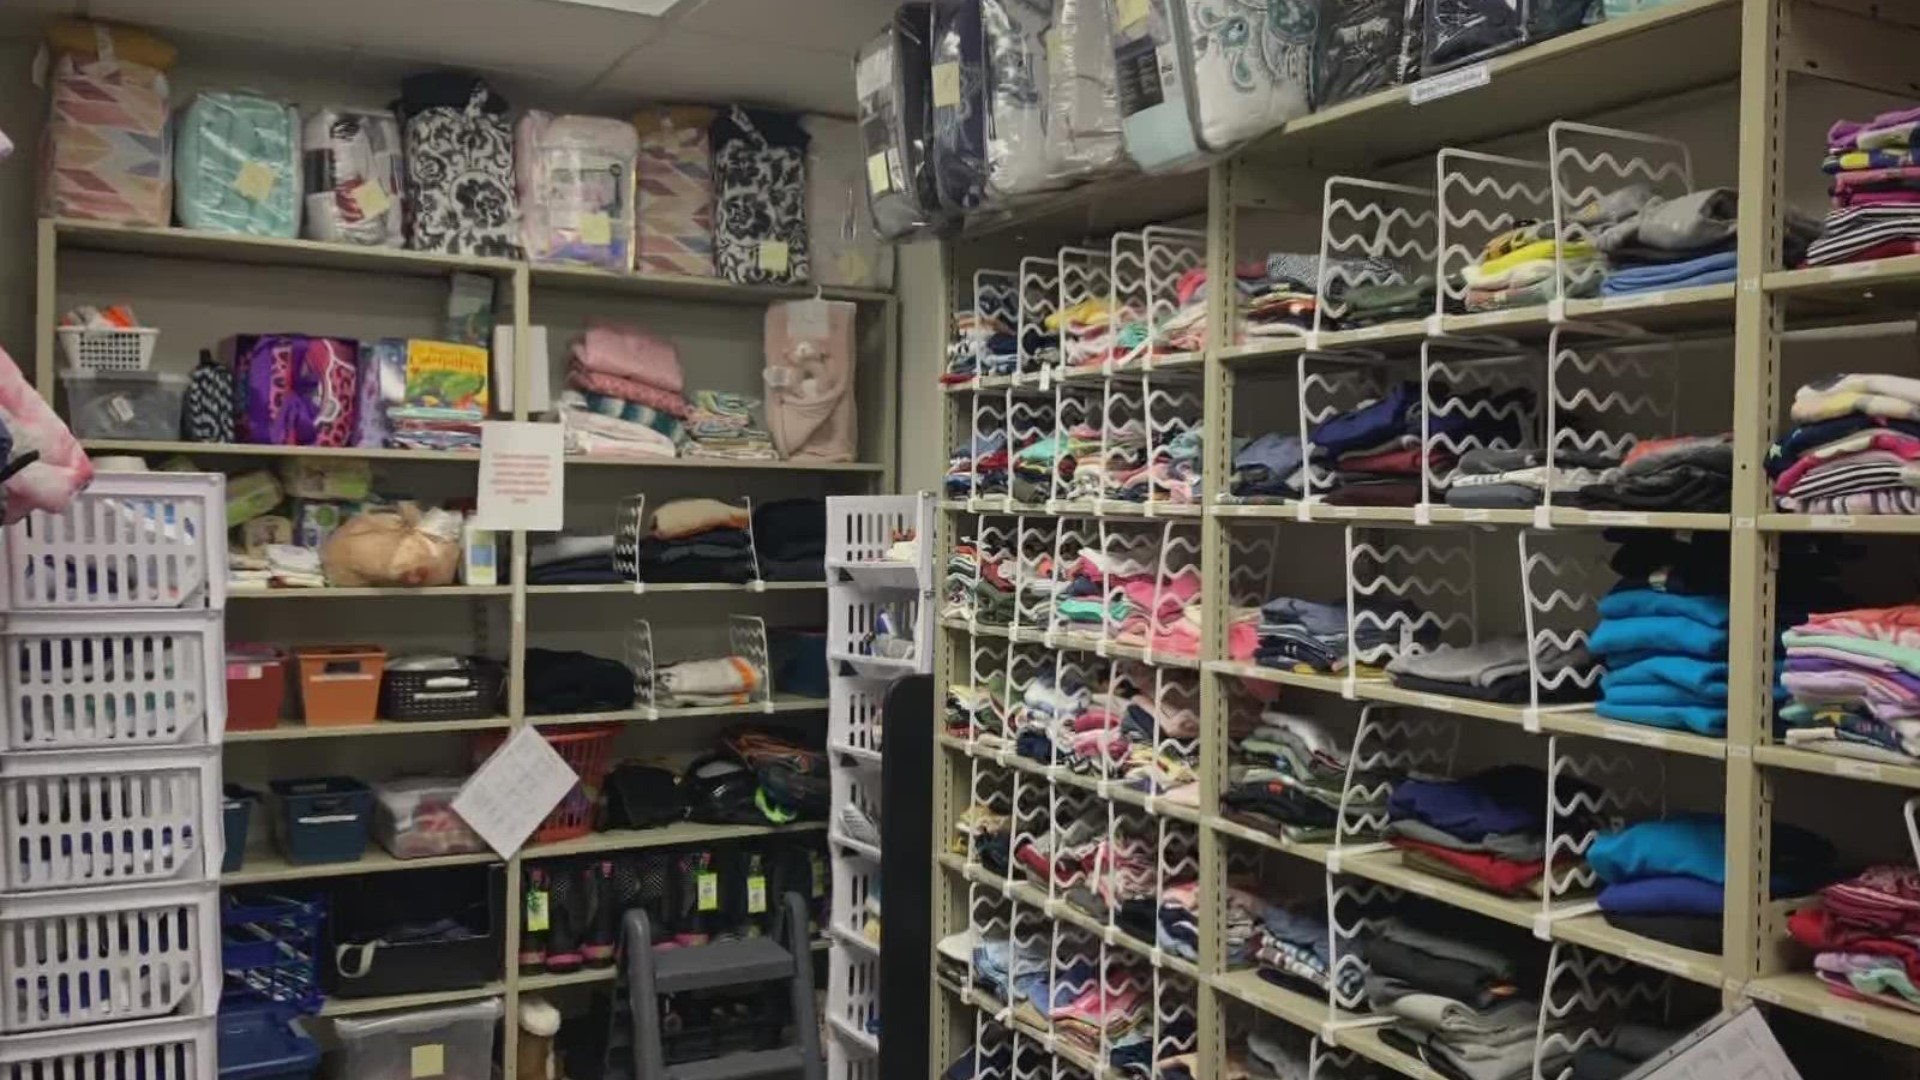 With a new partnership between St. Luke's Health System's Cares Closet and the Assistance League of Boise, 500 kids in need will be able to receive needed clothing.